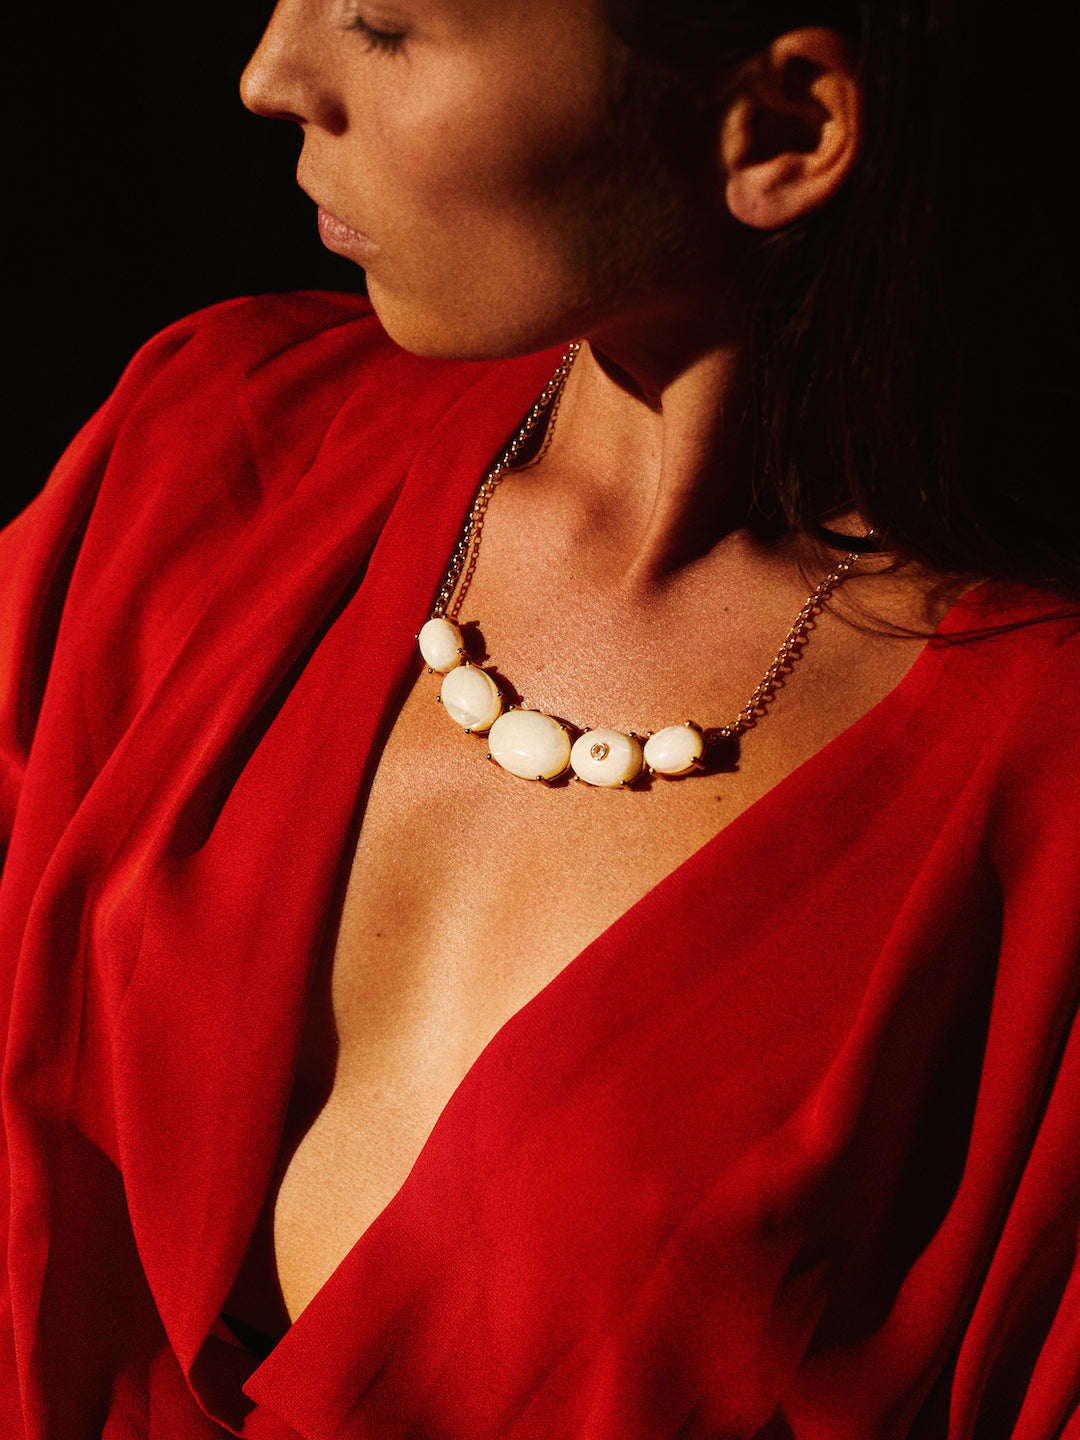 fine jewelry necklace in gold with mother of pearl and white sapphire gemstones from Atelier ORMAN